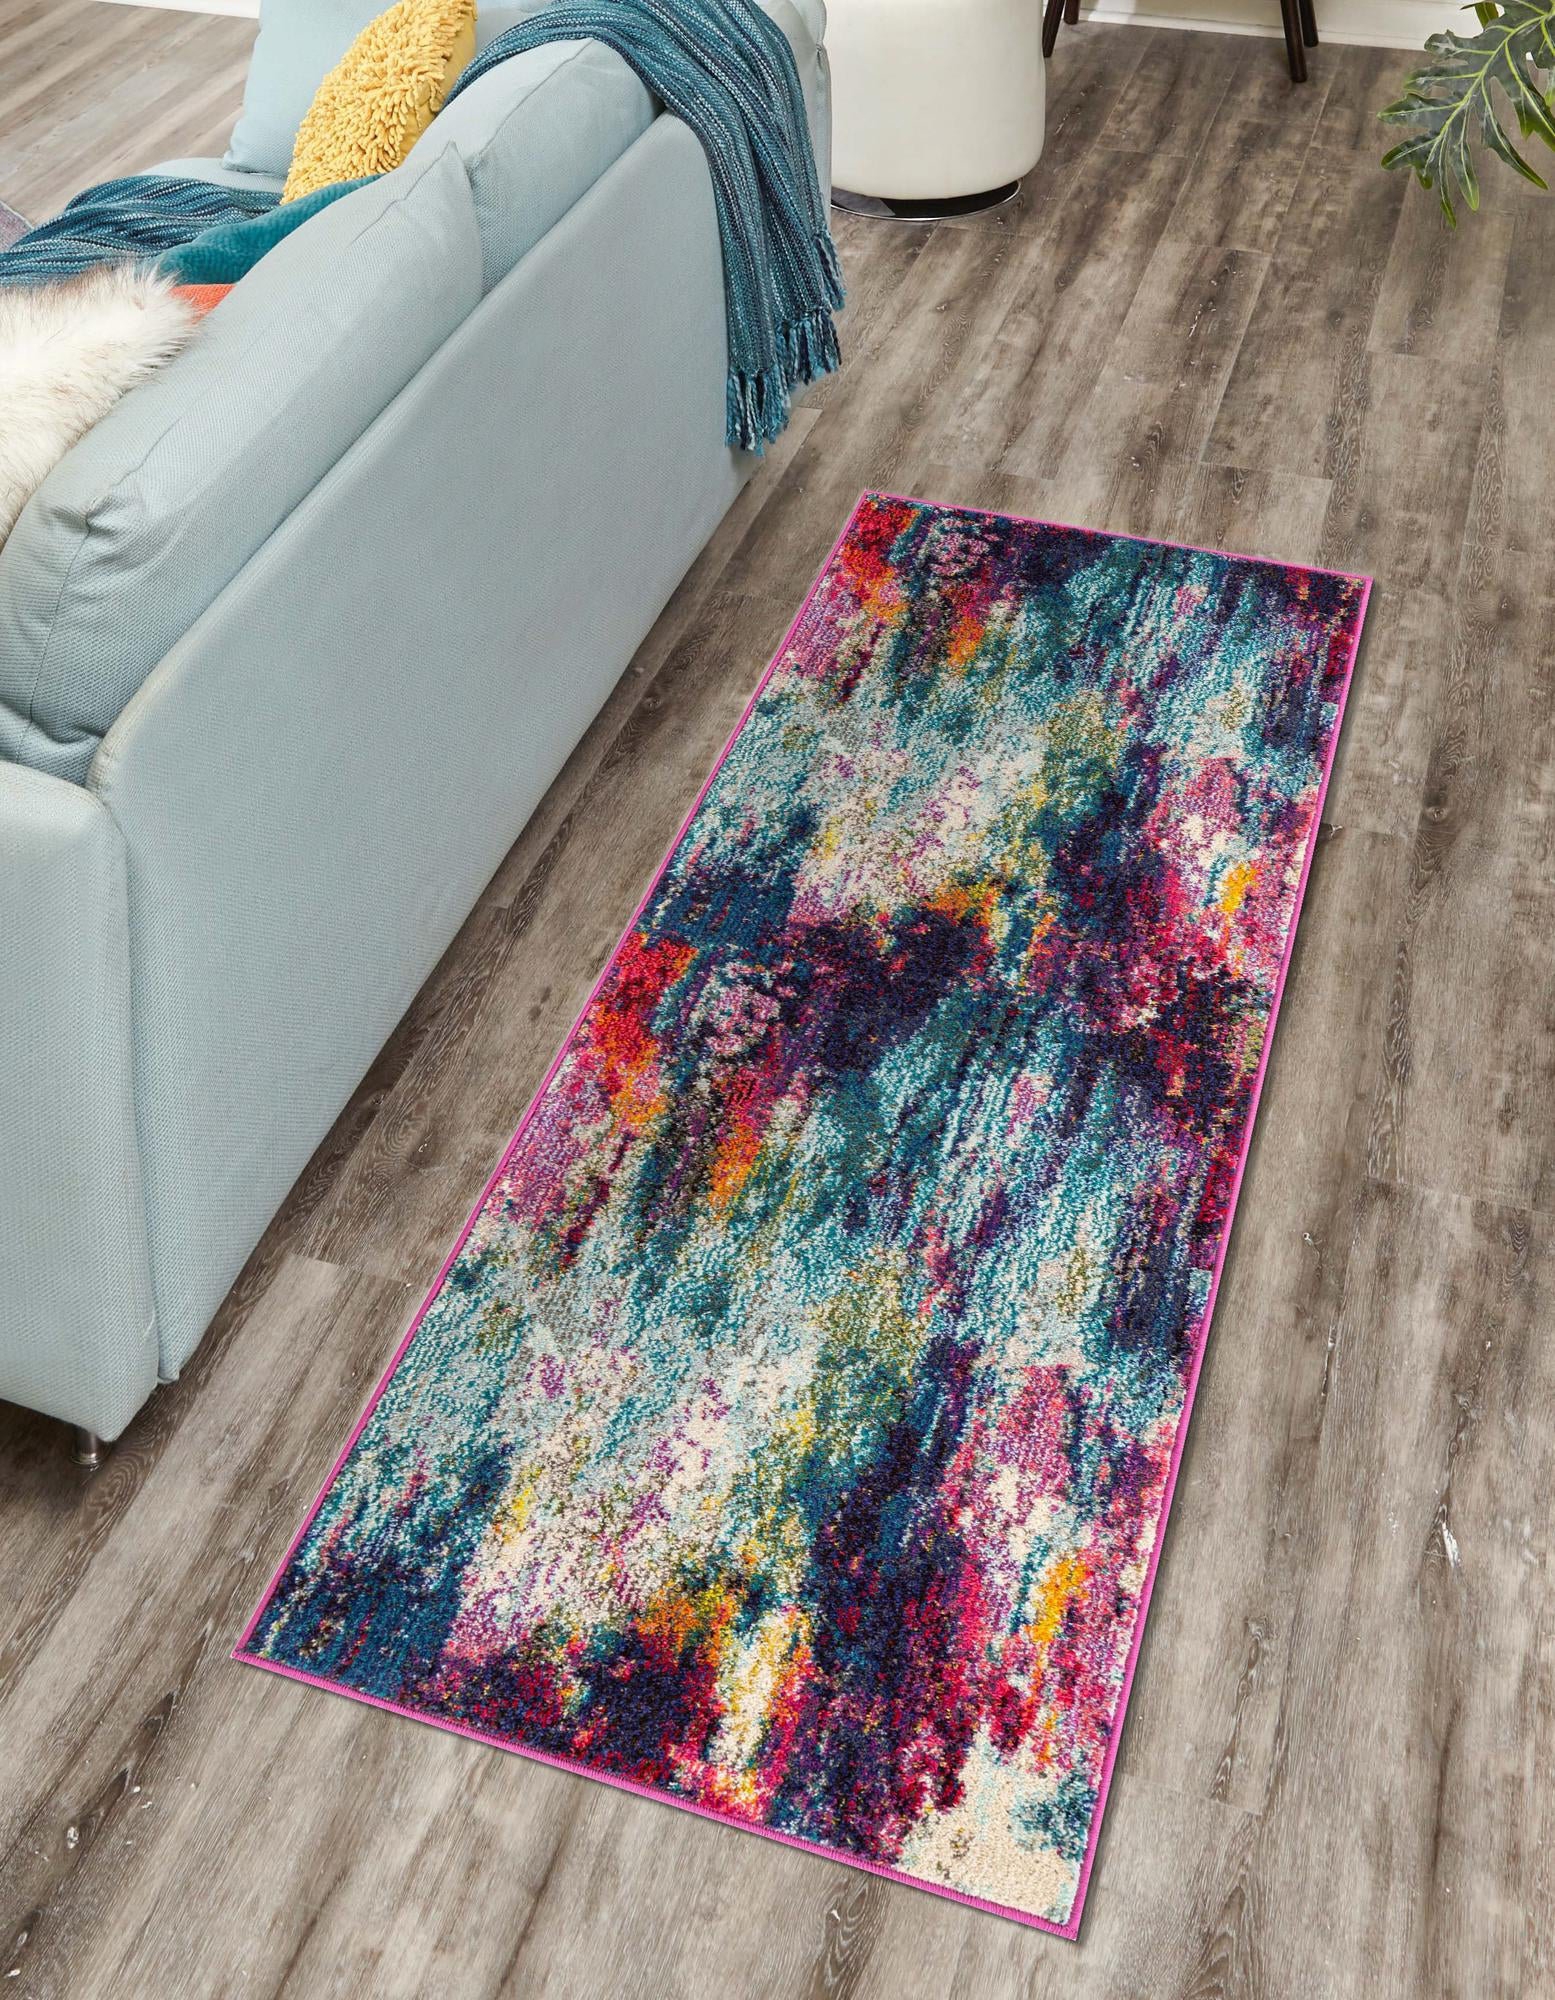 Details about   ELEMENTS BLUSH GEOMETRIC ON-TREND POWER LOOMED MODERN RUG RUNNER 80x300cm **NEW* 